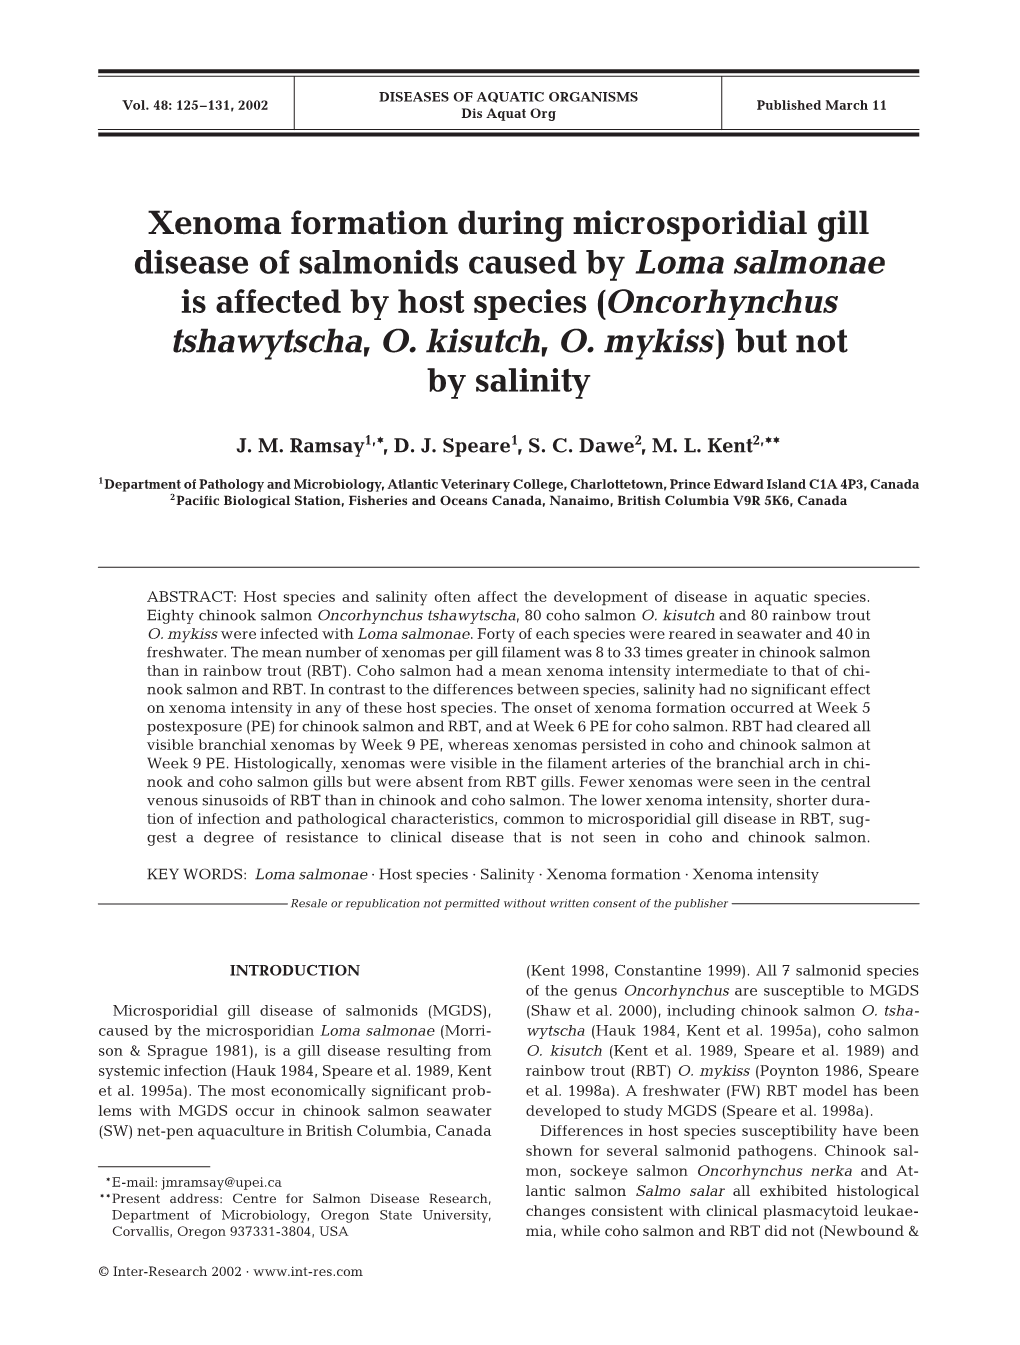 Xenoma Formation During Microsporidial Gill Disease of Salmonids Caused by Loma Salmonae Is Affected by Host Species (Oncorhynchus Tshawytscha, O